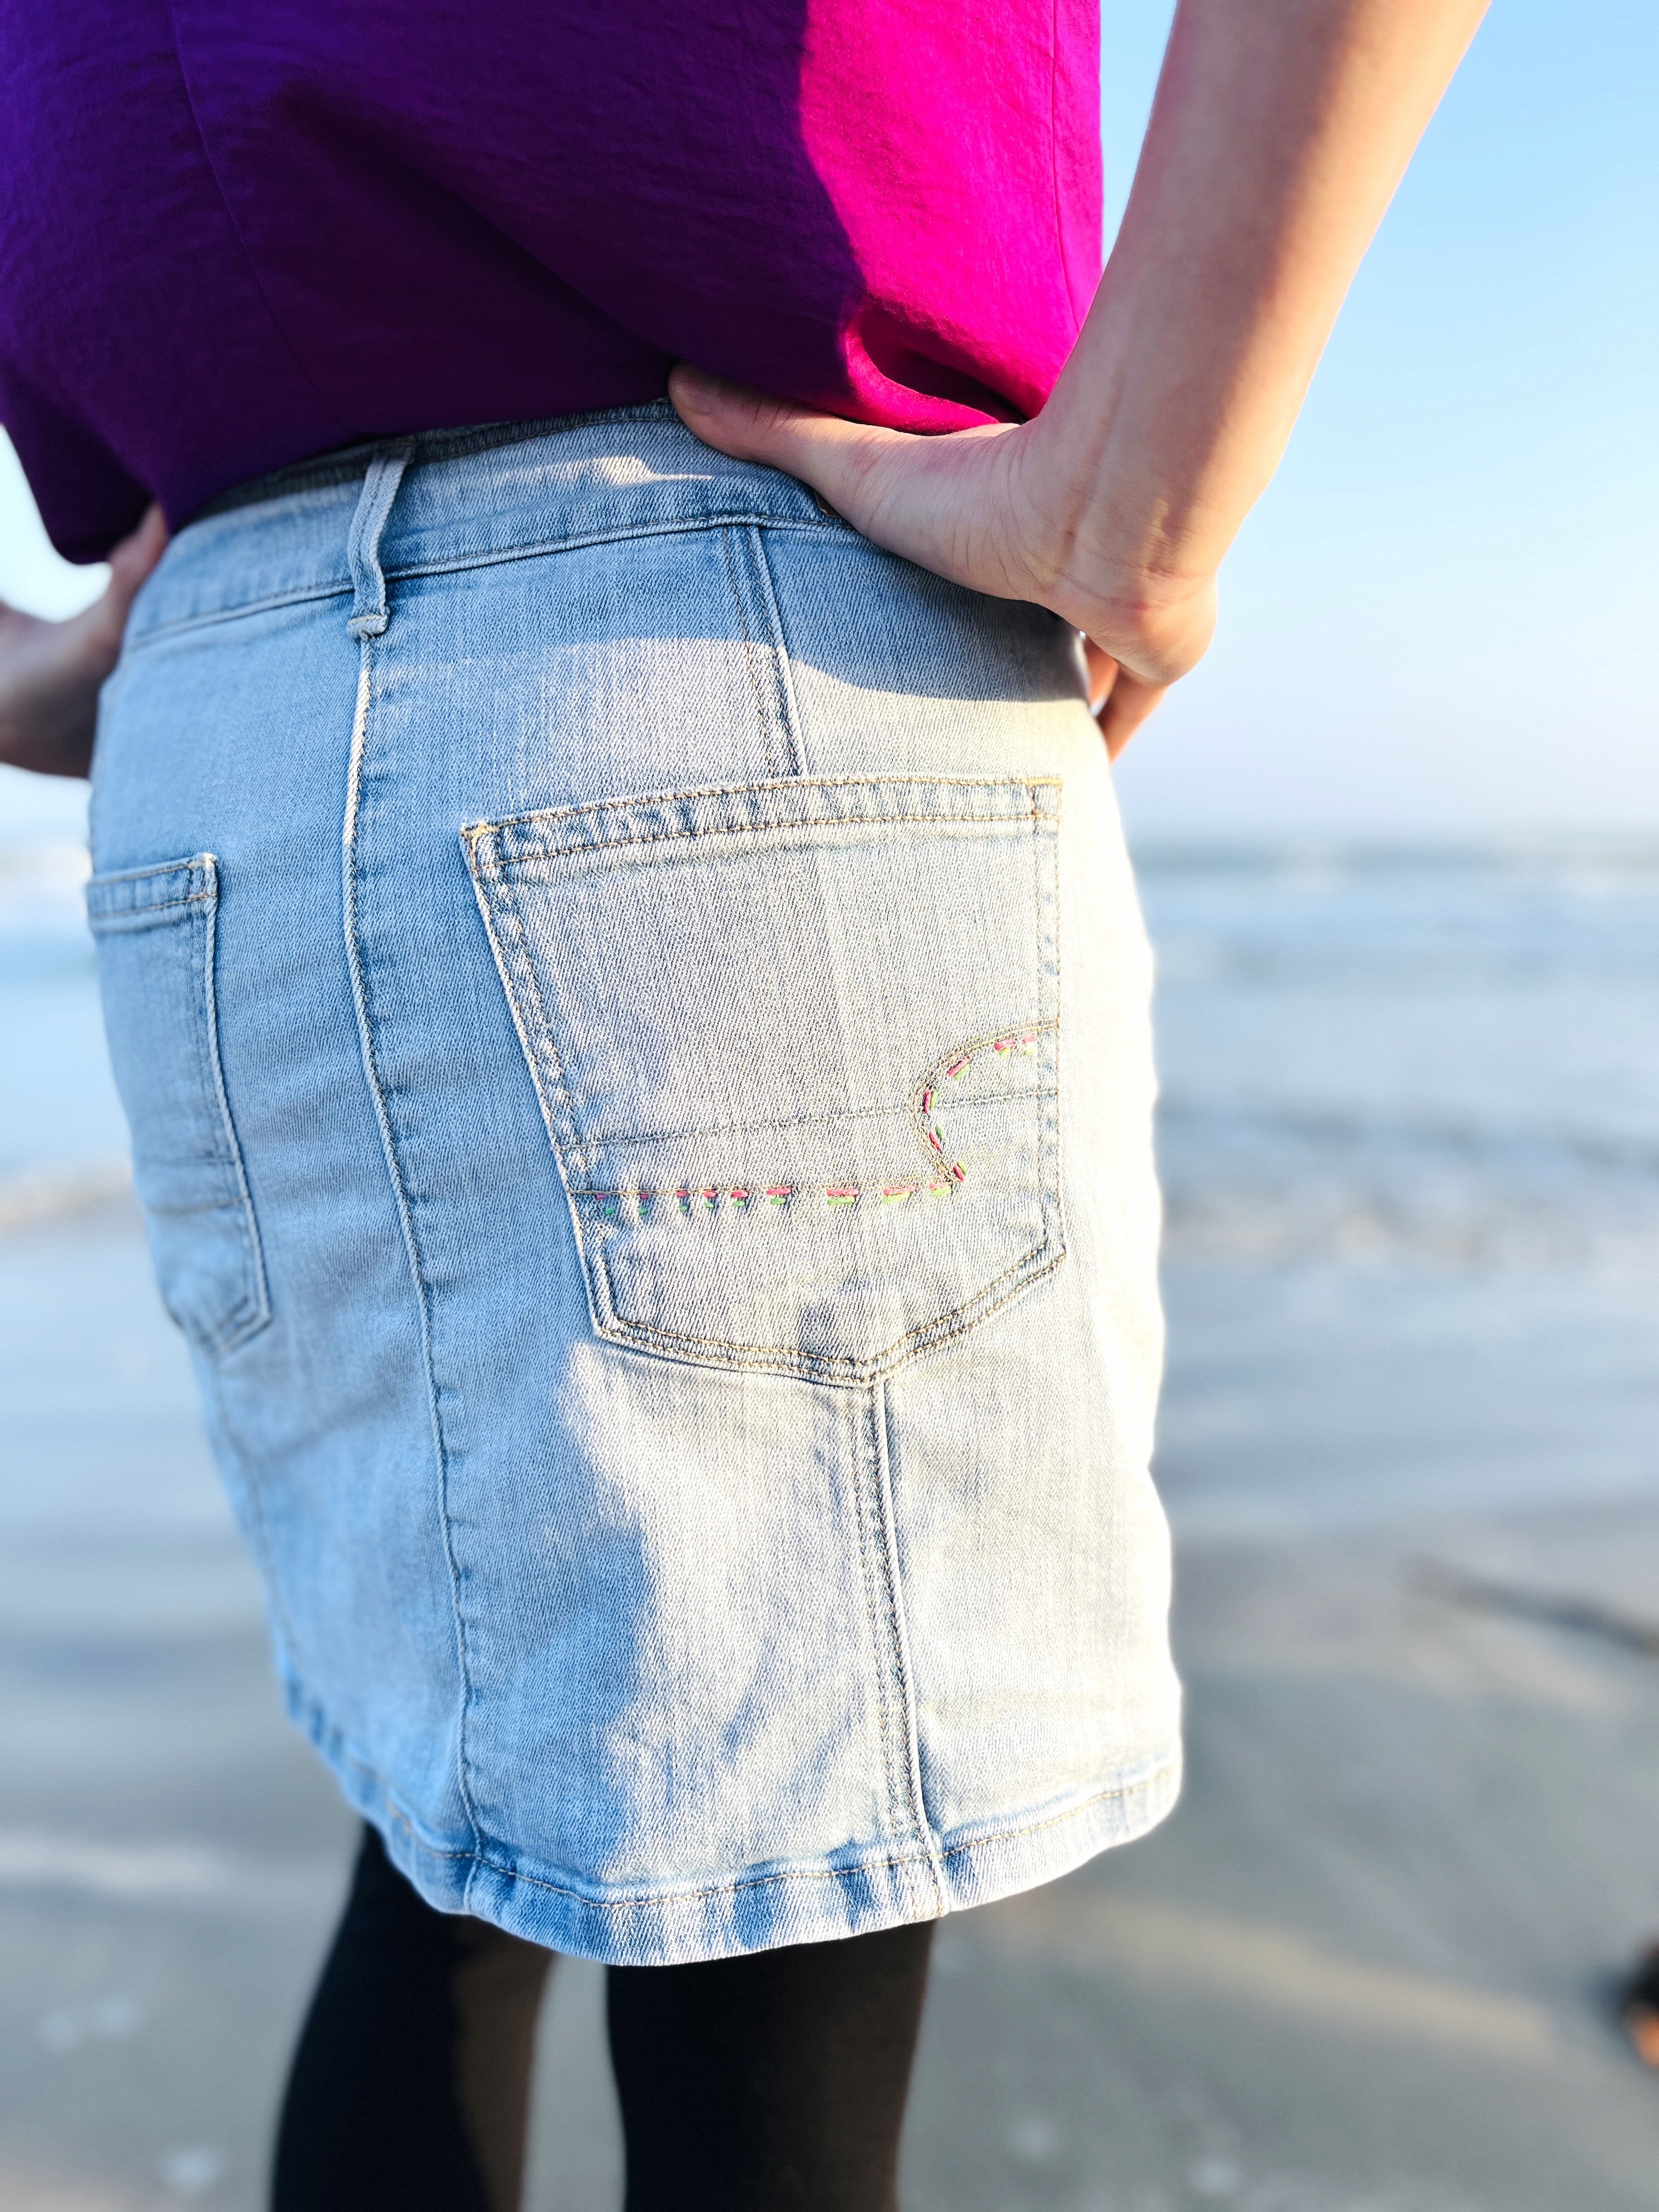 Chic Handstitched Upcycled Jean Skirt – Your New Wardrobe Staple